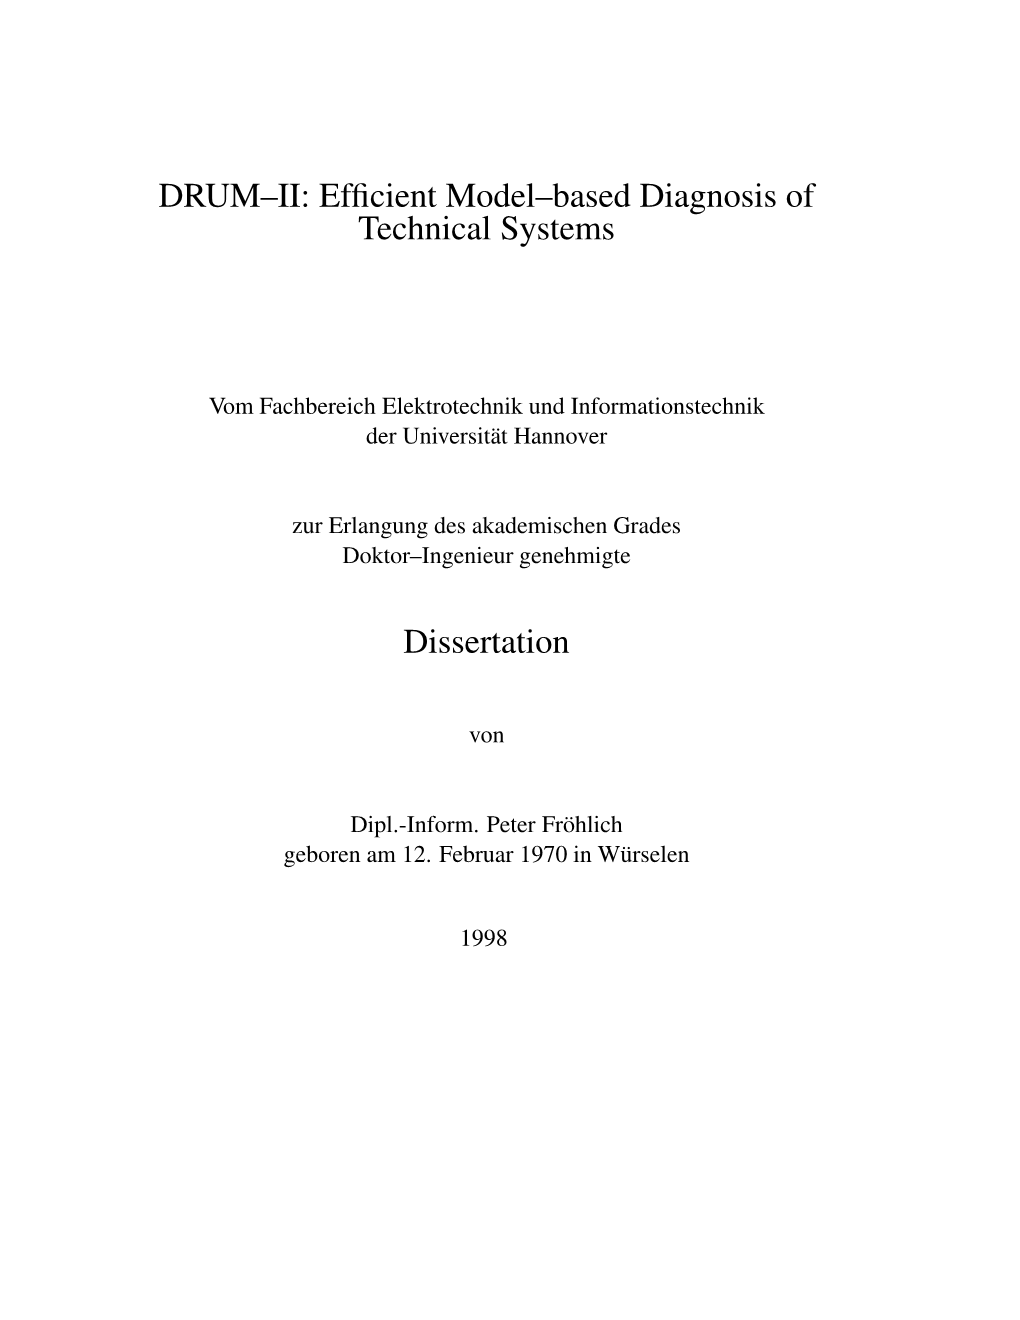 DRUM–II: Efficient Model–Based Diagnosis of Technical Systems